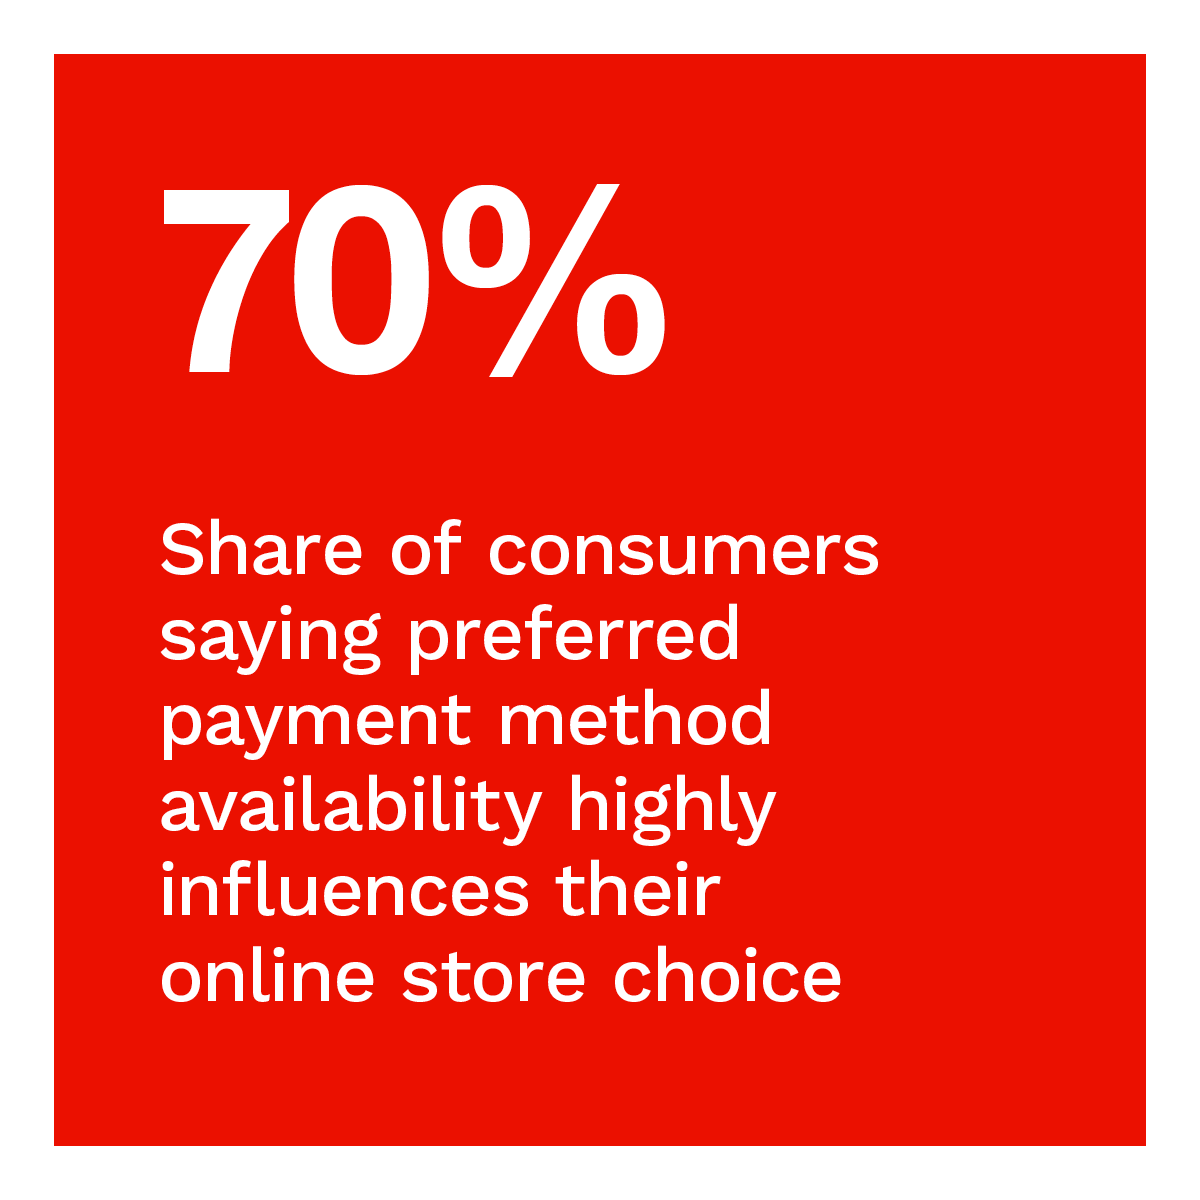 70%: Share of consumers saying preferred payment method availability highly influences their online store choice